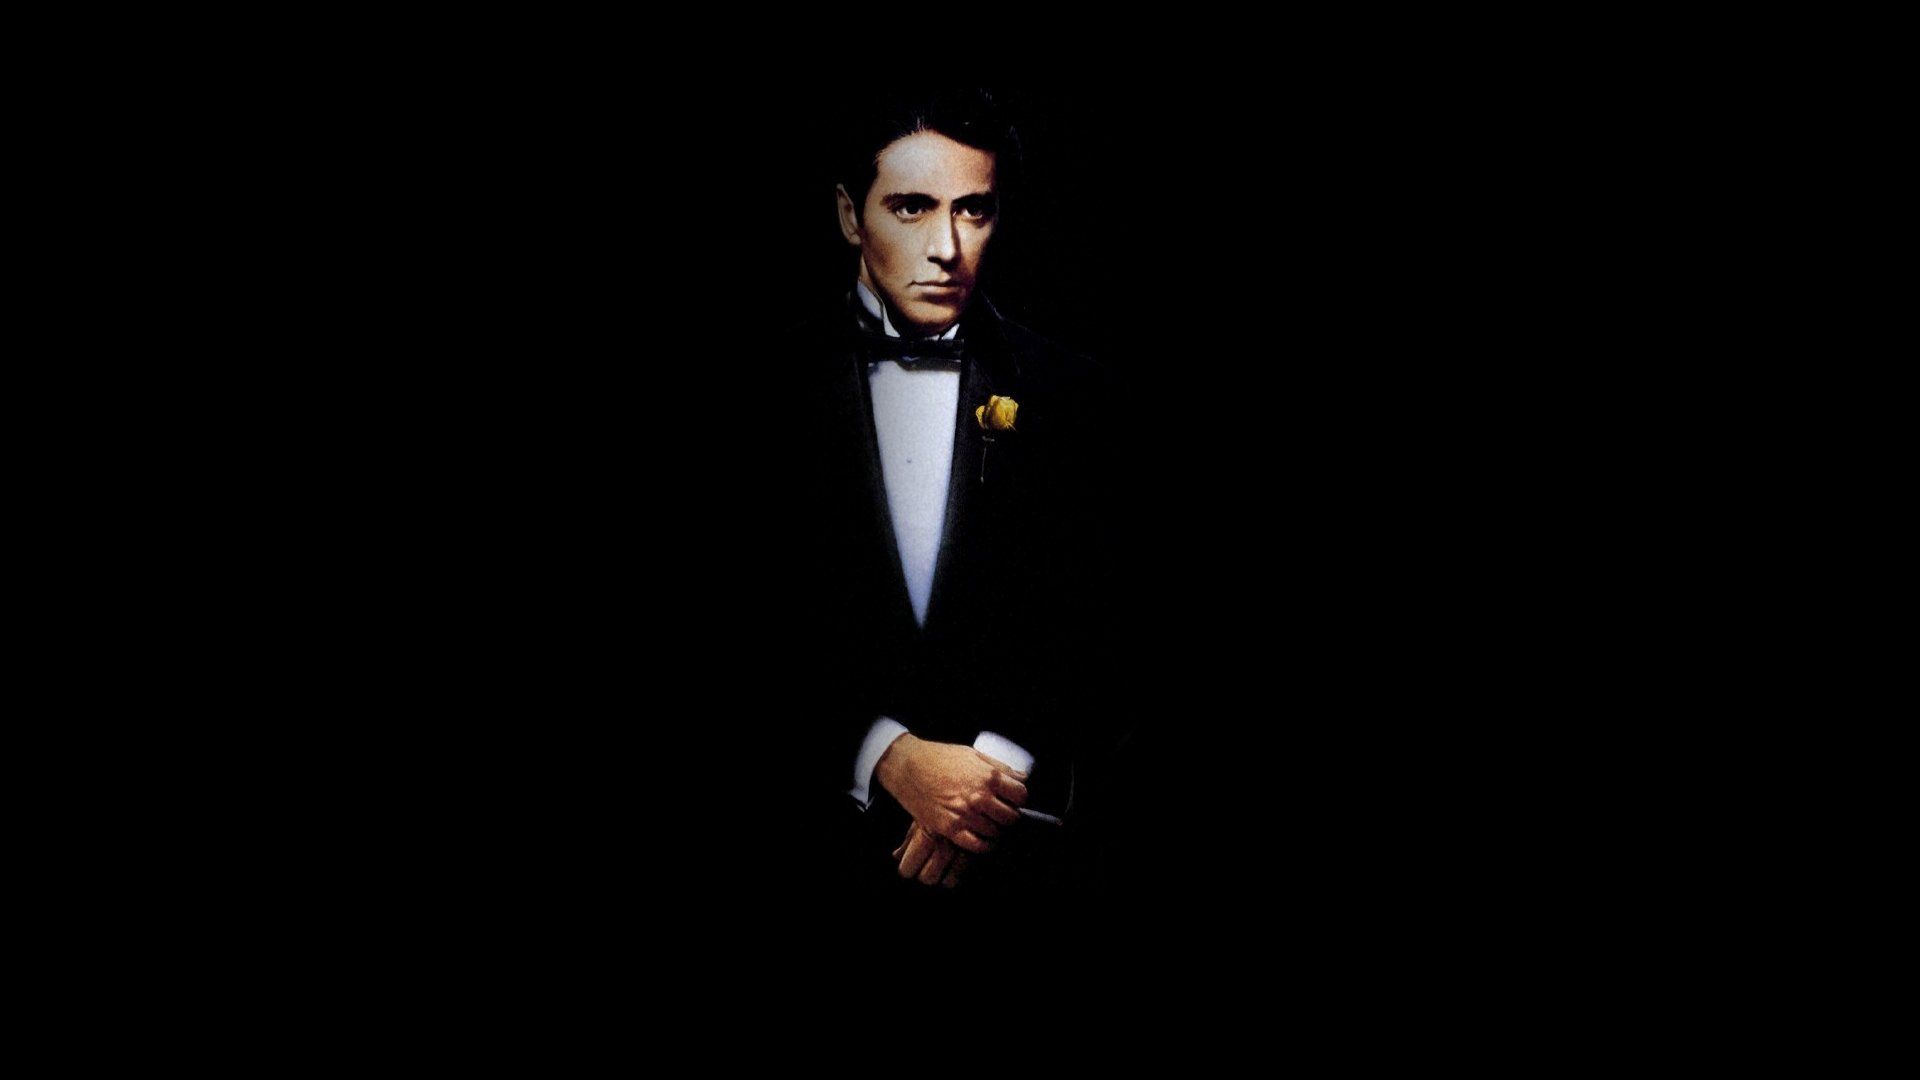 The Godfather Part II background